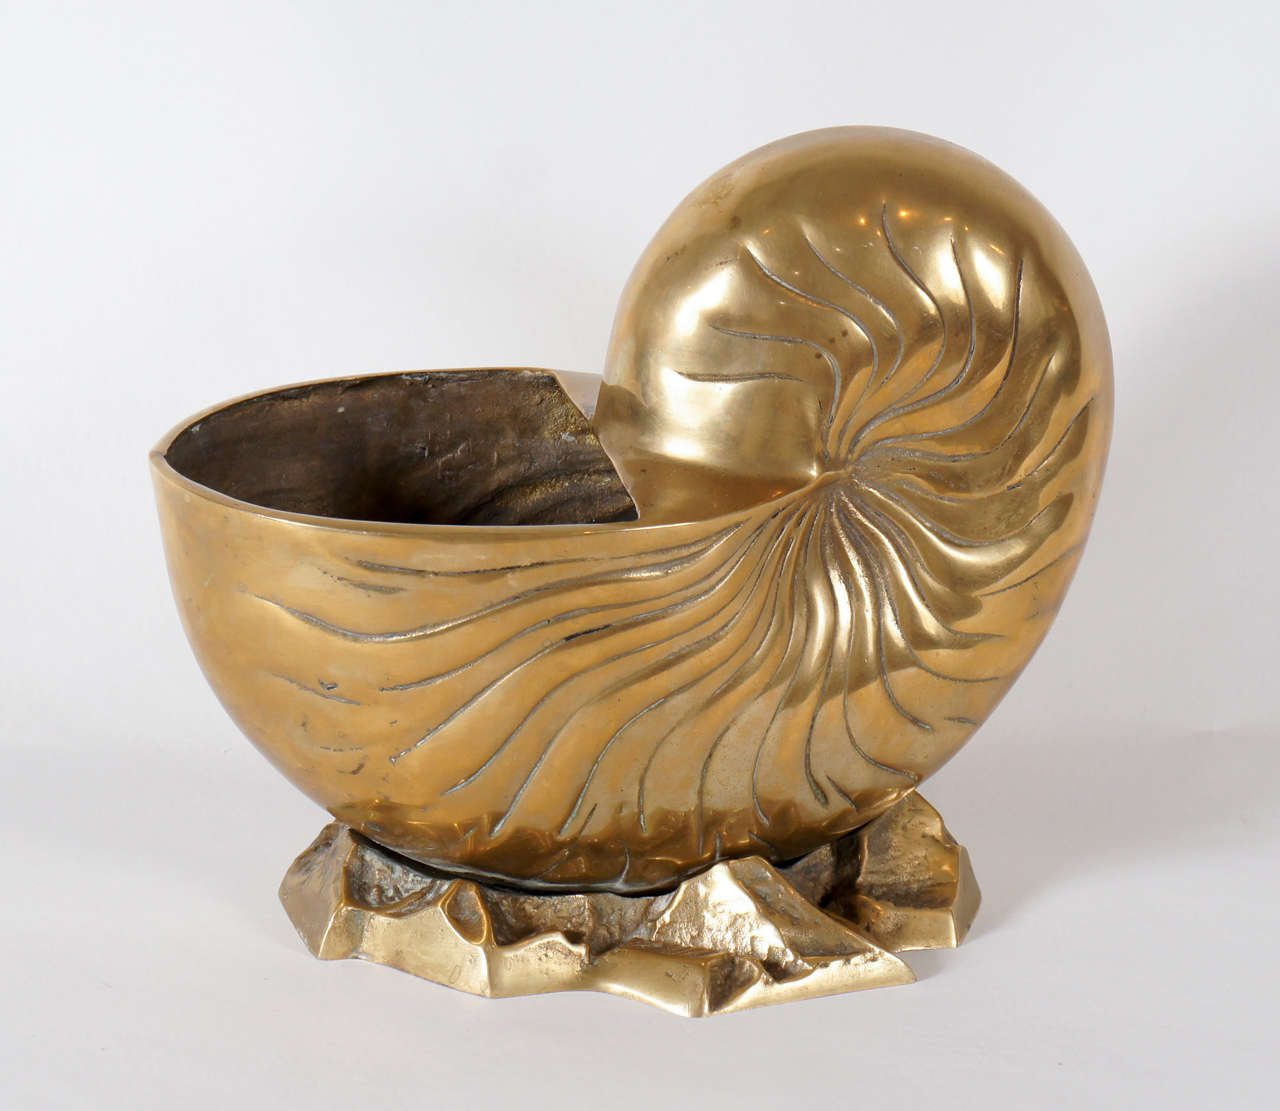 Here is a beautiful large scaled brass nautilus shell vase.